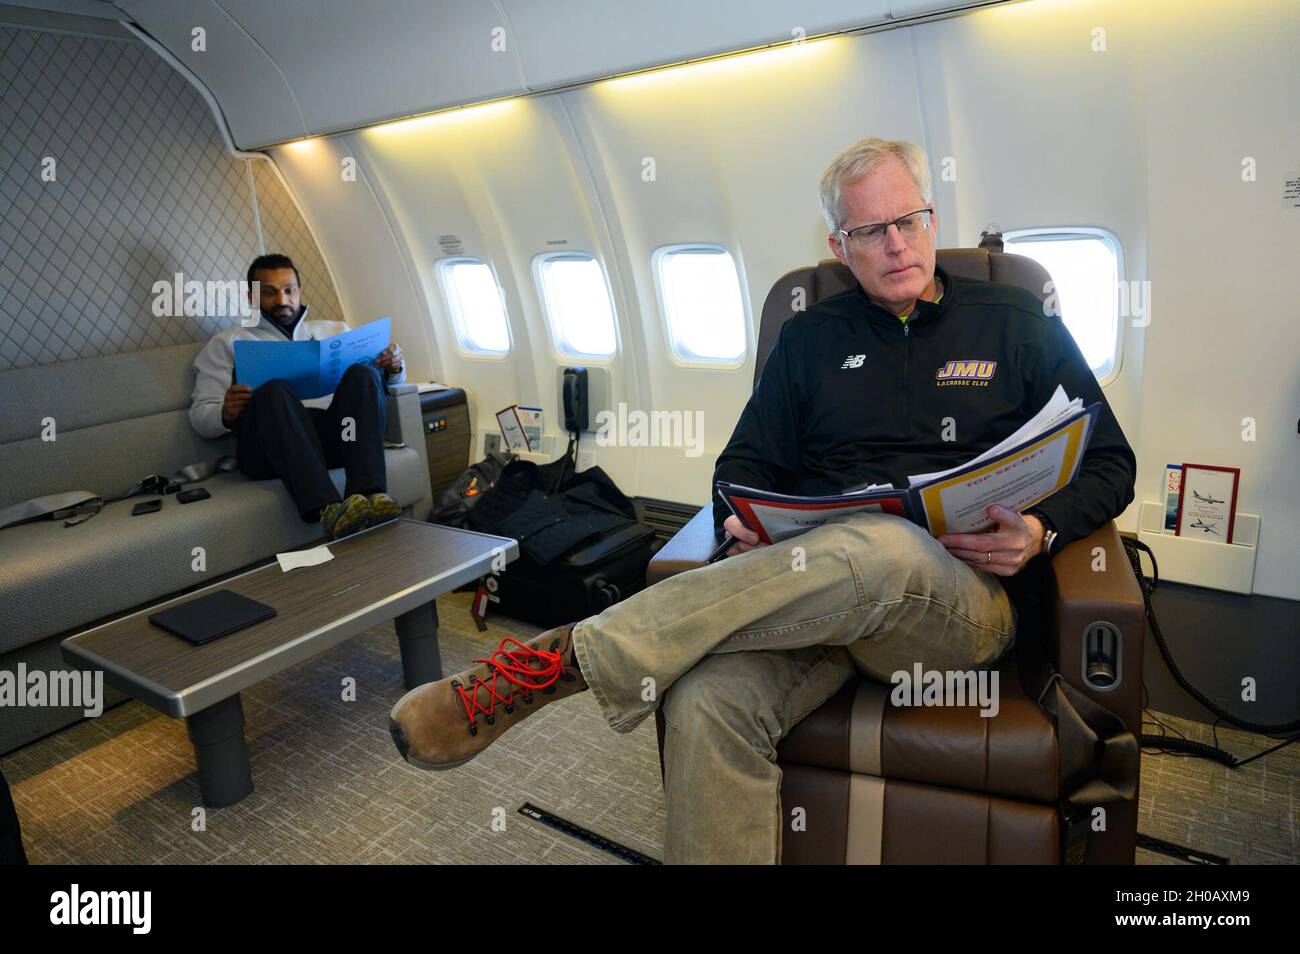 Acting Defense Secretary Chris Miller works in the aircraft cabin with Chief of Staff Kash Patel, after departing Peterson Air Force Base, Colo., Jan. 14, 2021. Stock Photo